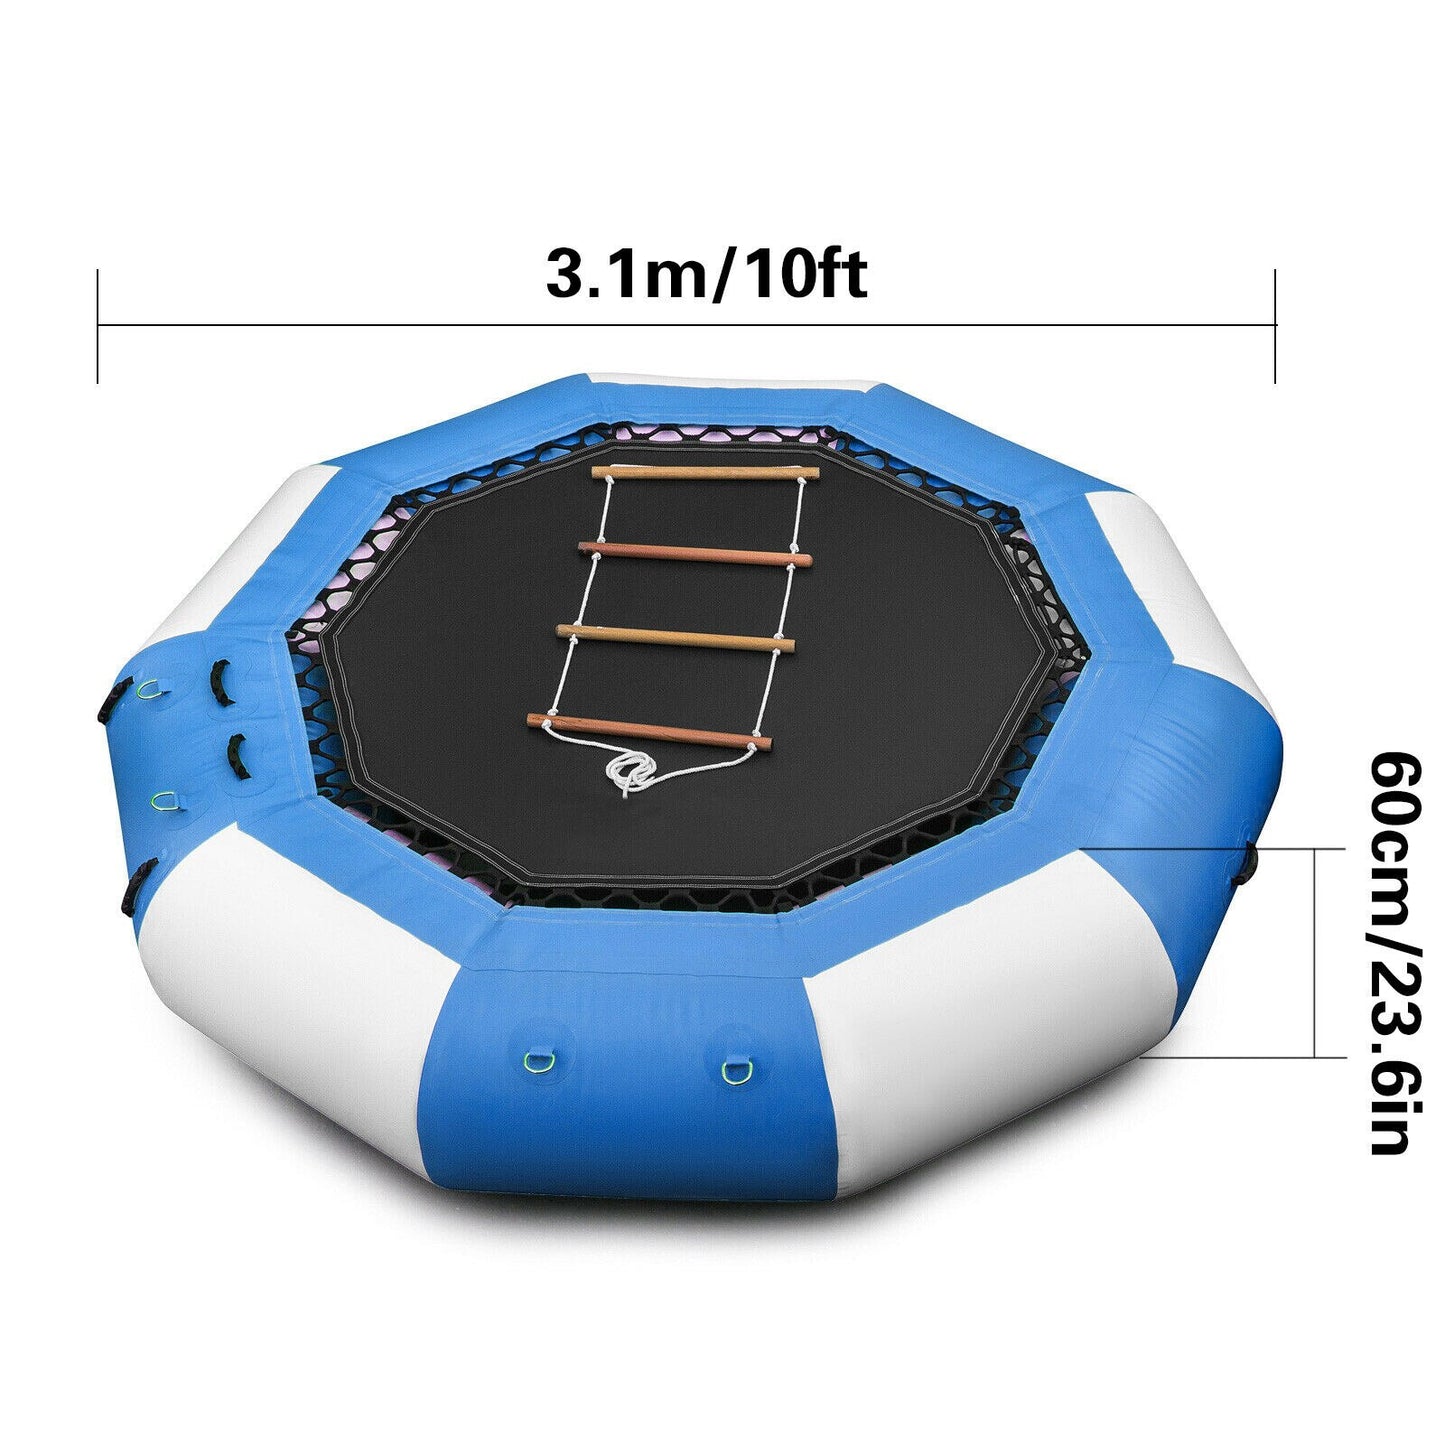 VEVOR Inflatable Water Trampoline PVC Tarpaulin Floated Bounce Platform Smooth and Waterproof Surface W/ Ladder For Pool Ocean